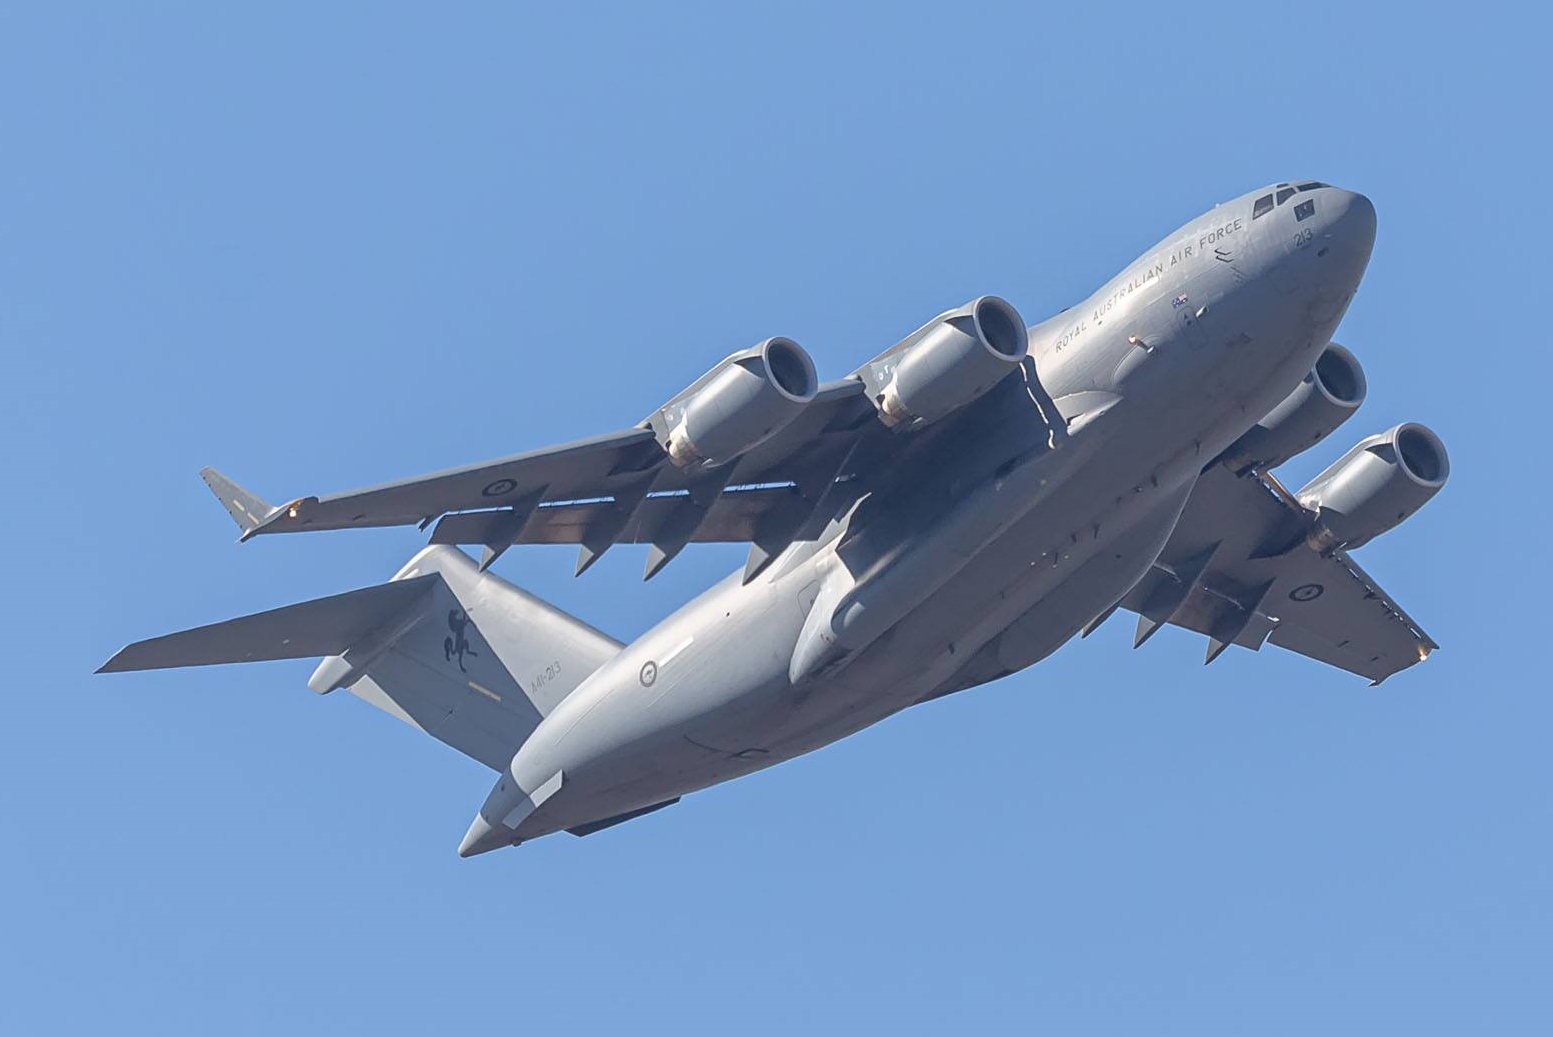 Central Queensland Plane Spotting: Royal Australian Air Force (RAAF) Boeing Globemaster III A41-213 "Stallion 62” Spotted Completing Airwork at Rockhampton Airport - Plus More!